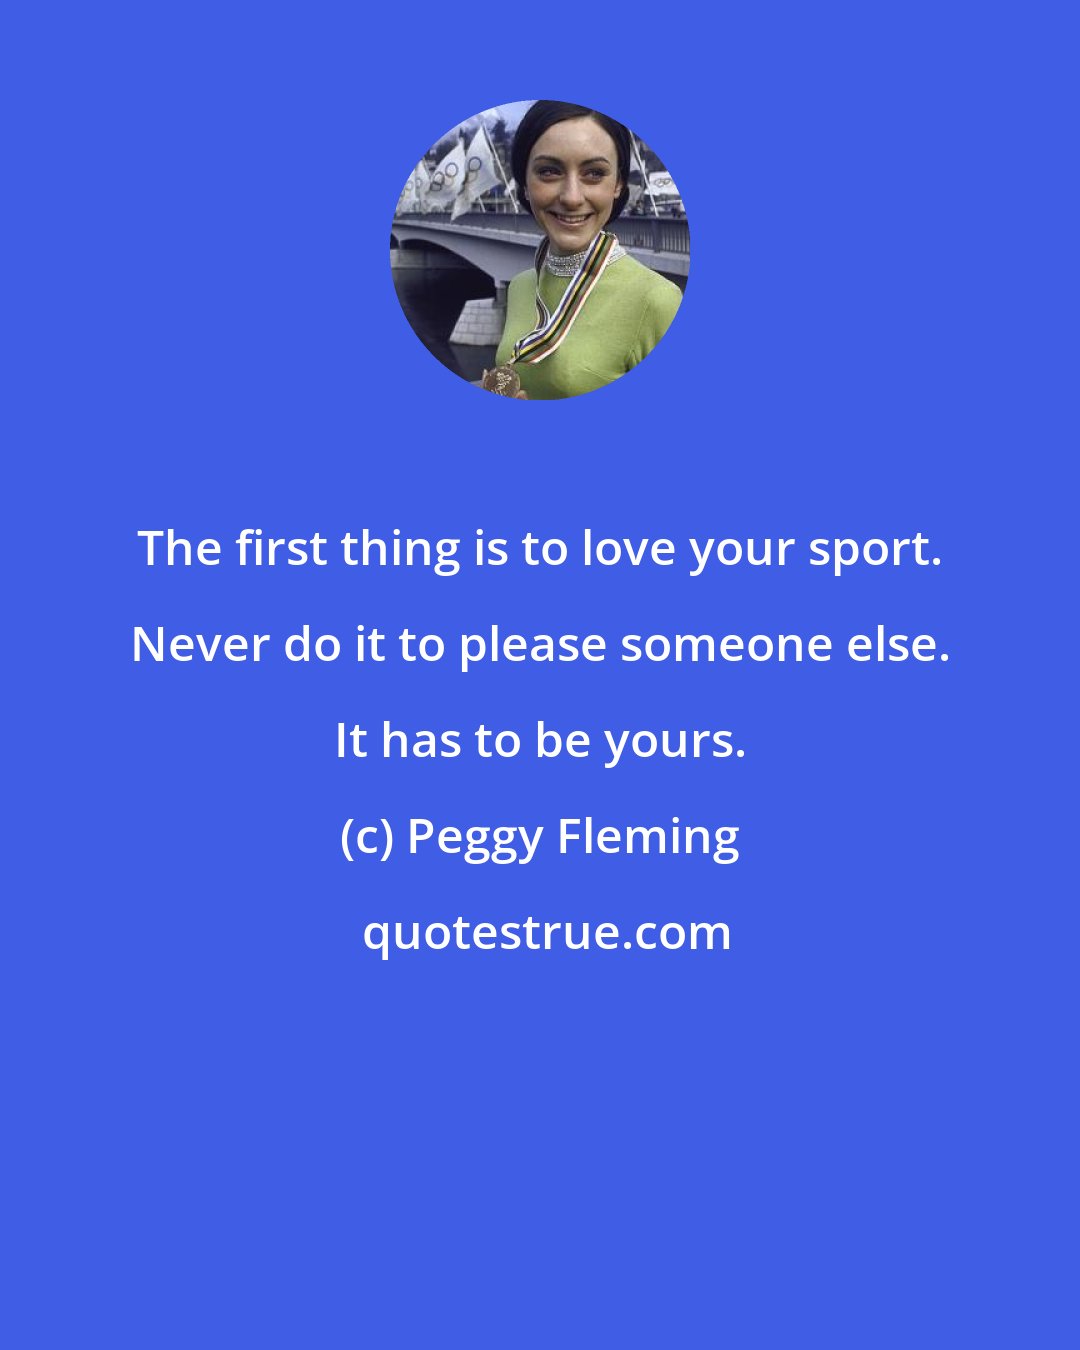 Peggy Fleming: The first thing is to love your sport. Never do it to please someone else. It has to be yours.